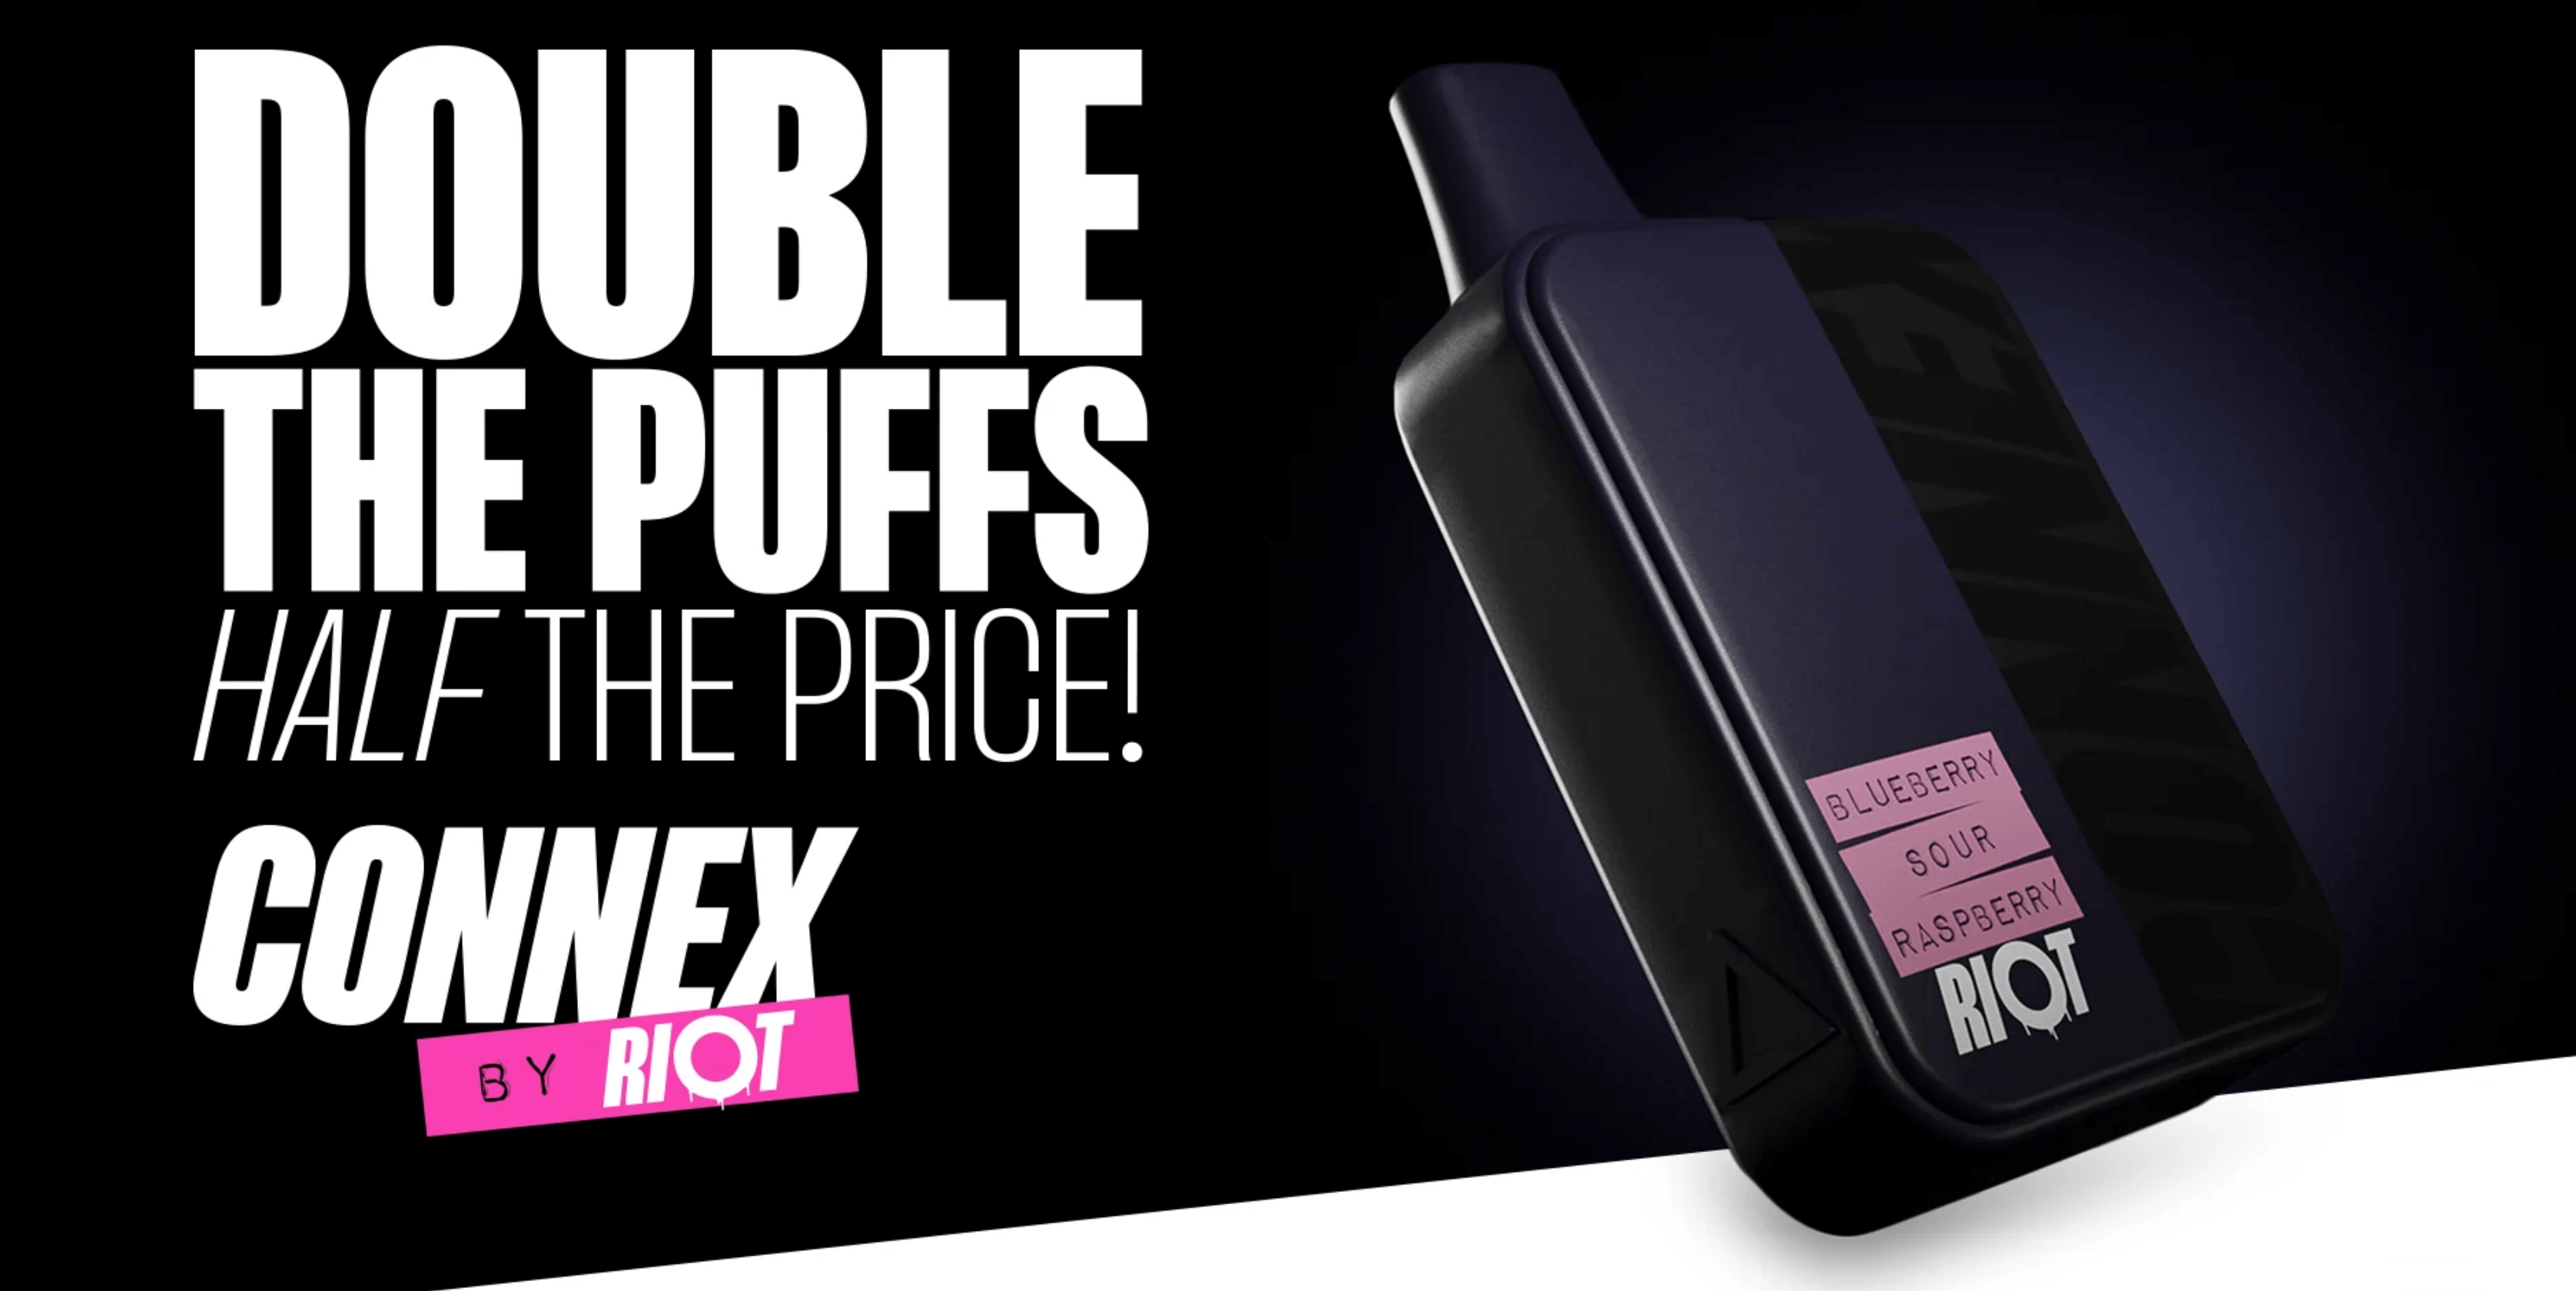 Riot Connex | Double the puffs, half the price